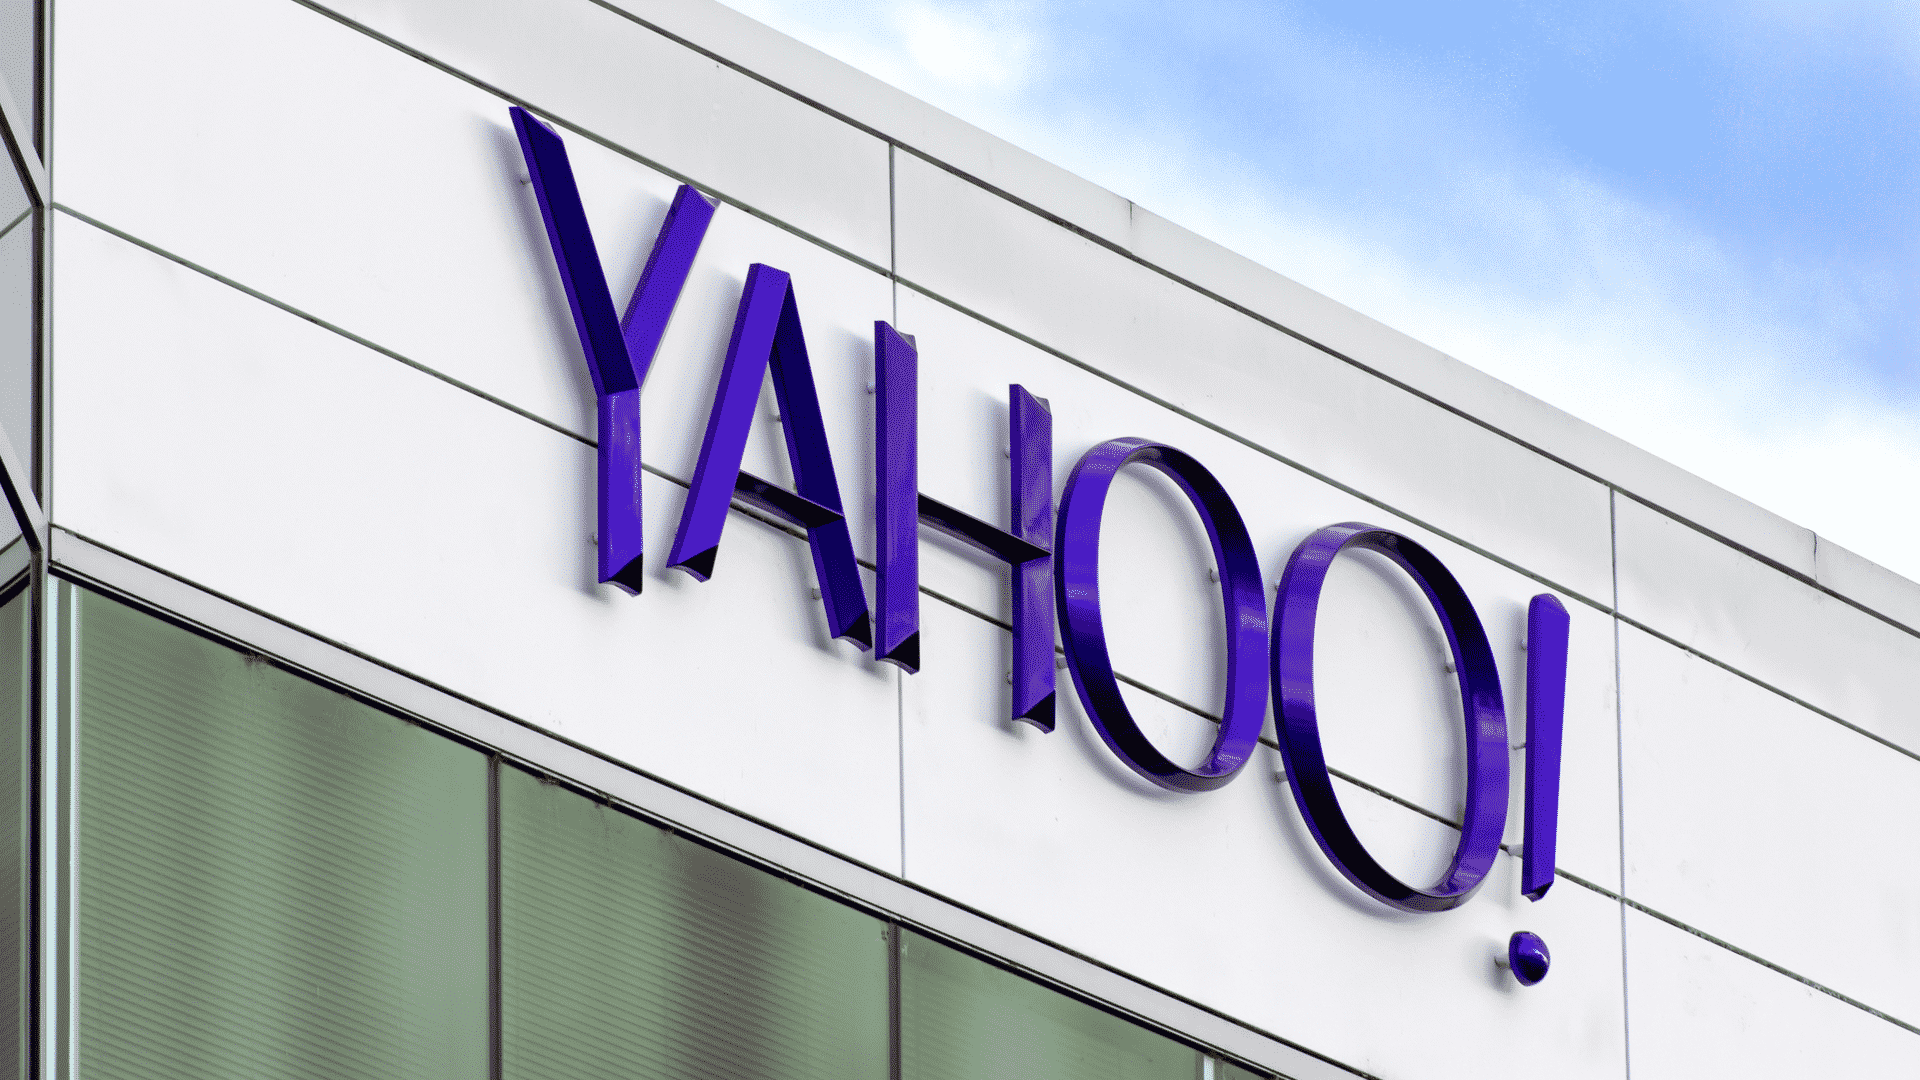 Yahoo’s new partnership with MikMak brings native ads and analytics to CPG brands breaking into e-commerce